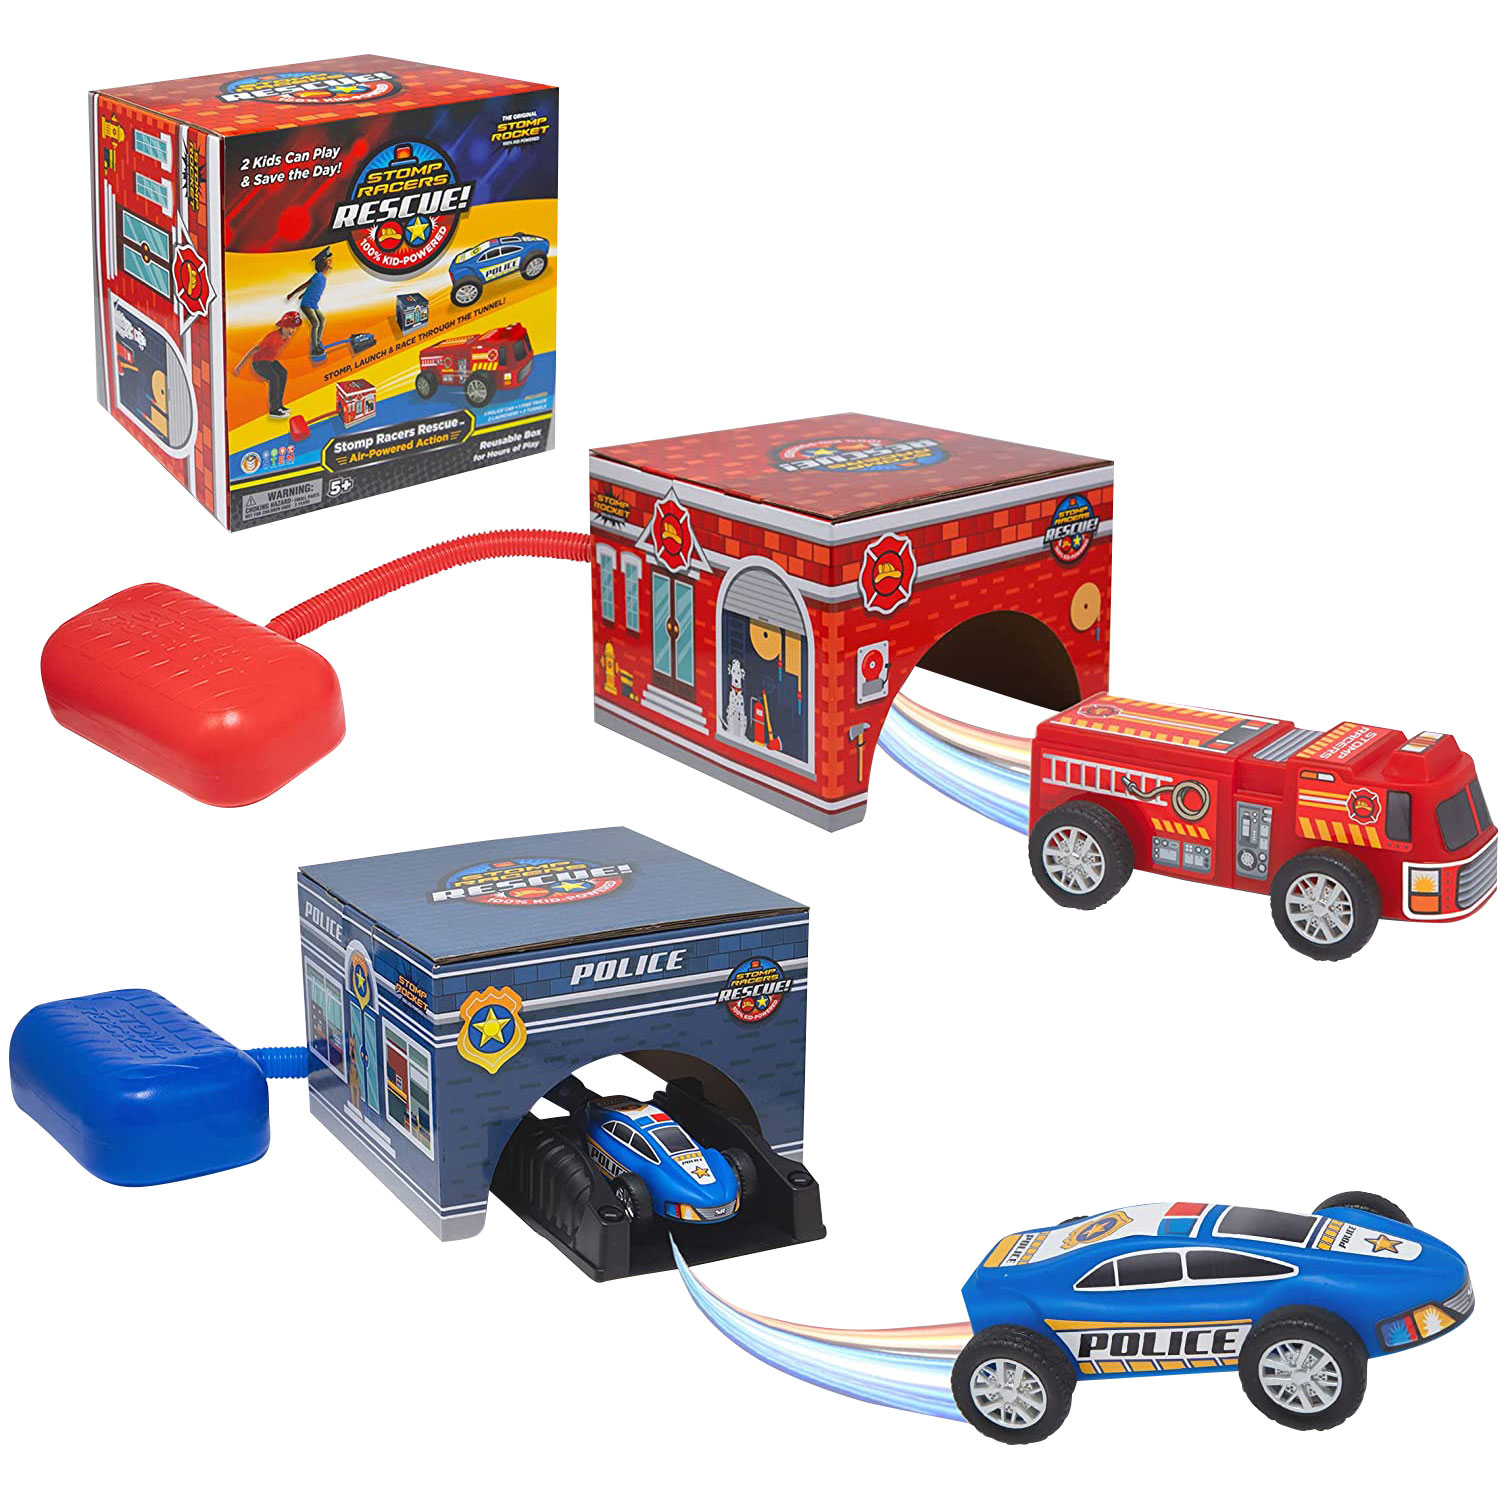 Stomp Rocket Rescue Racers - Blue/Red